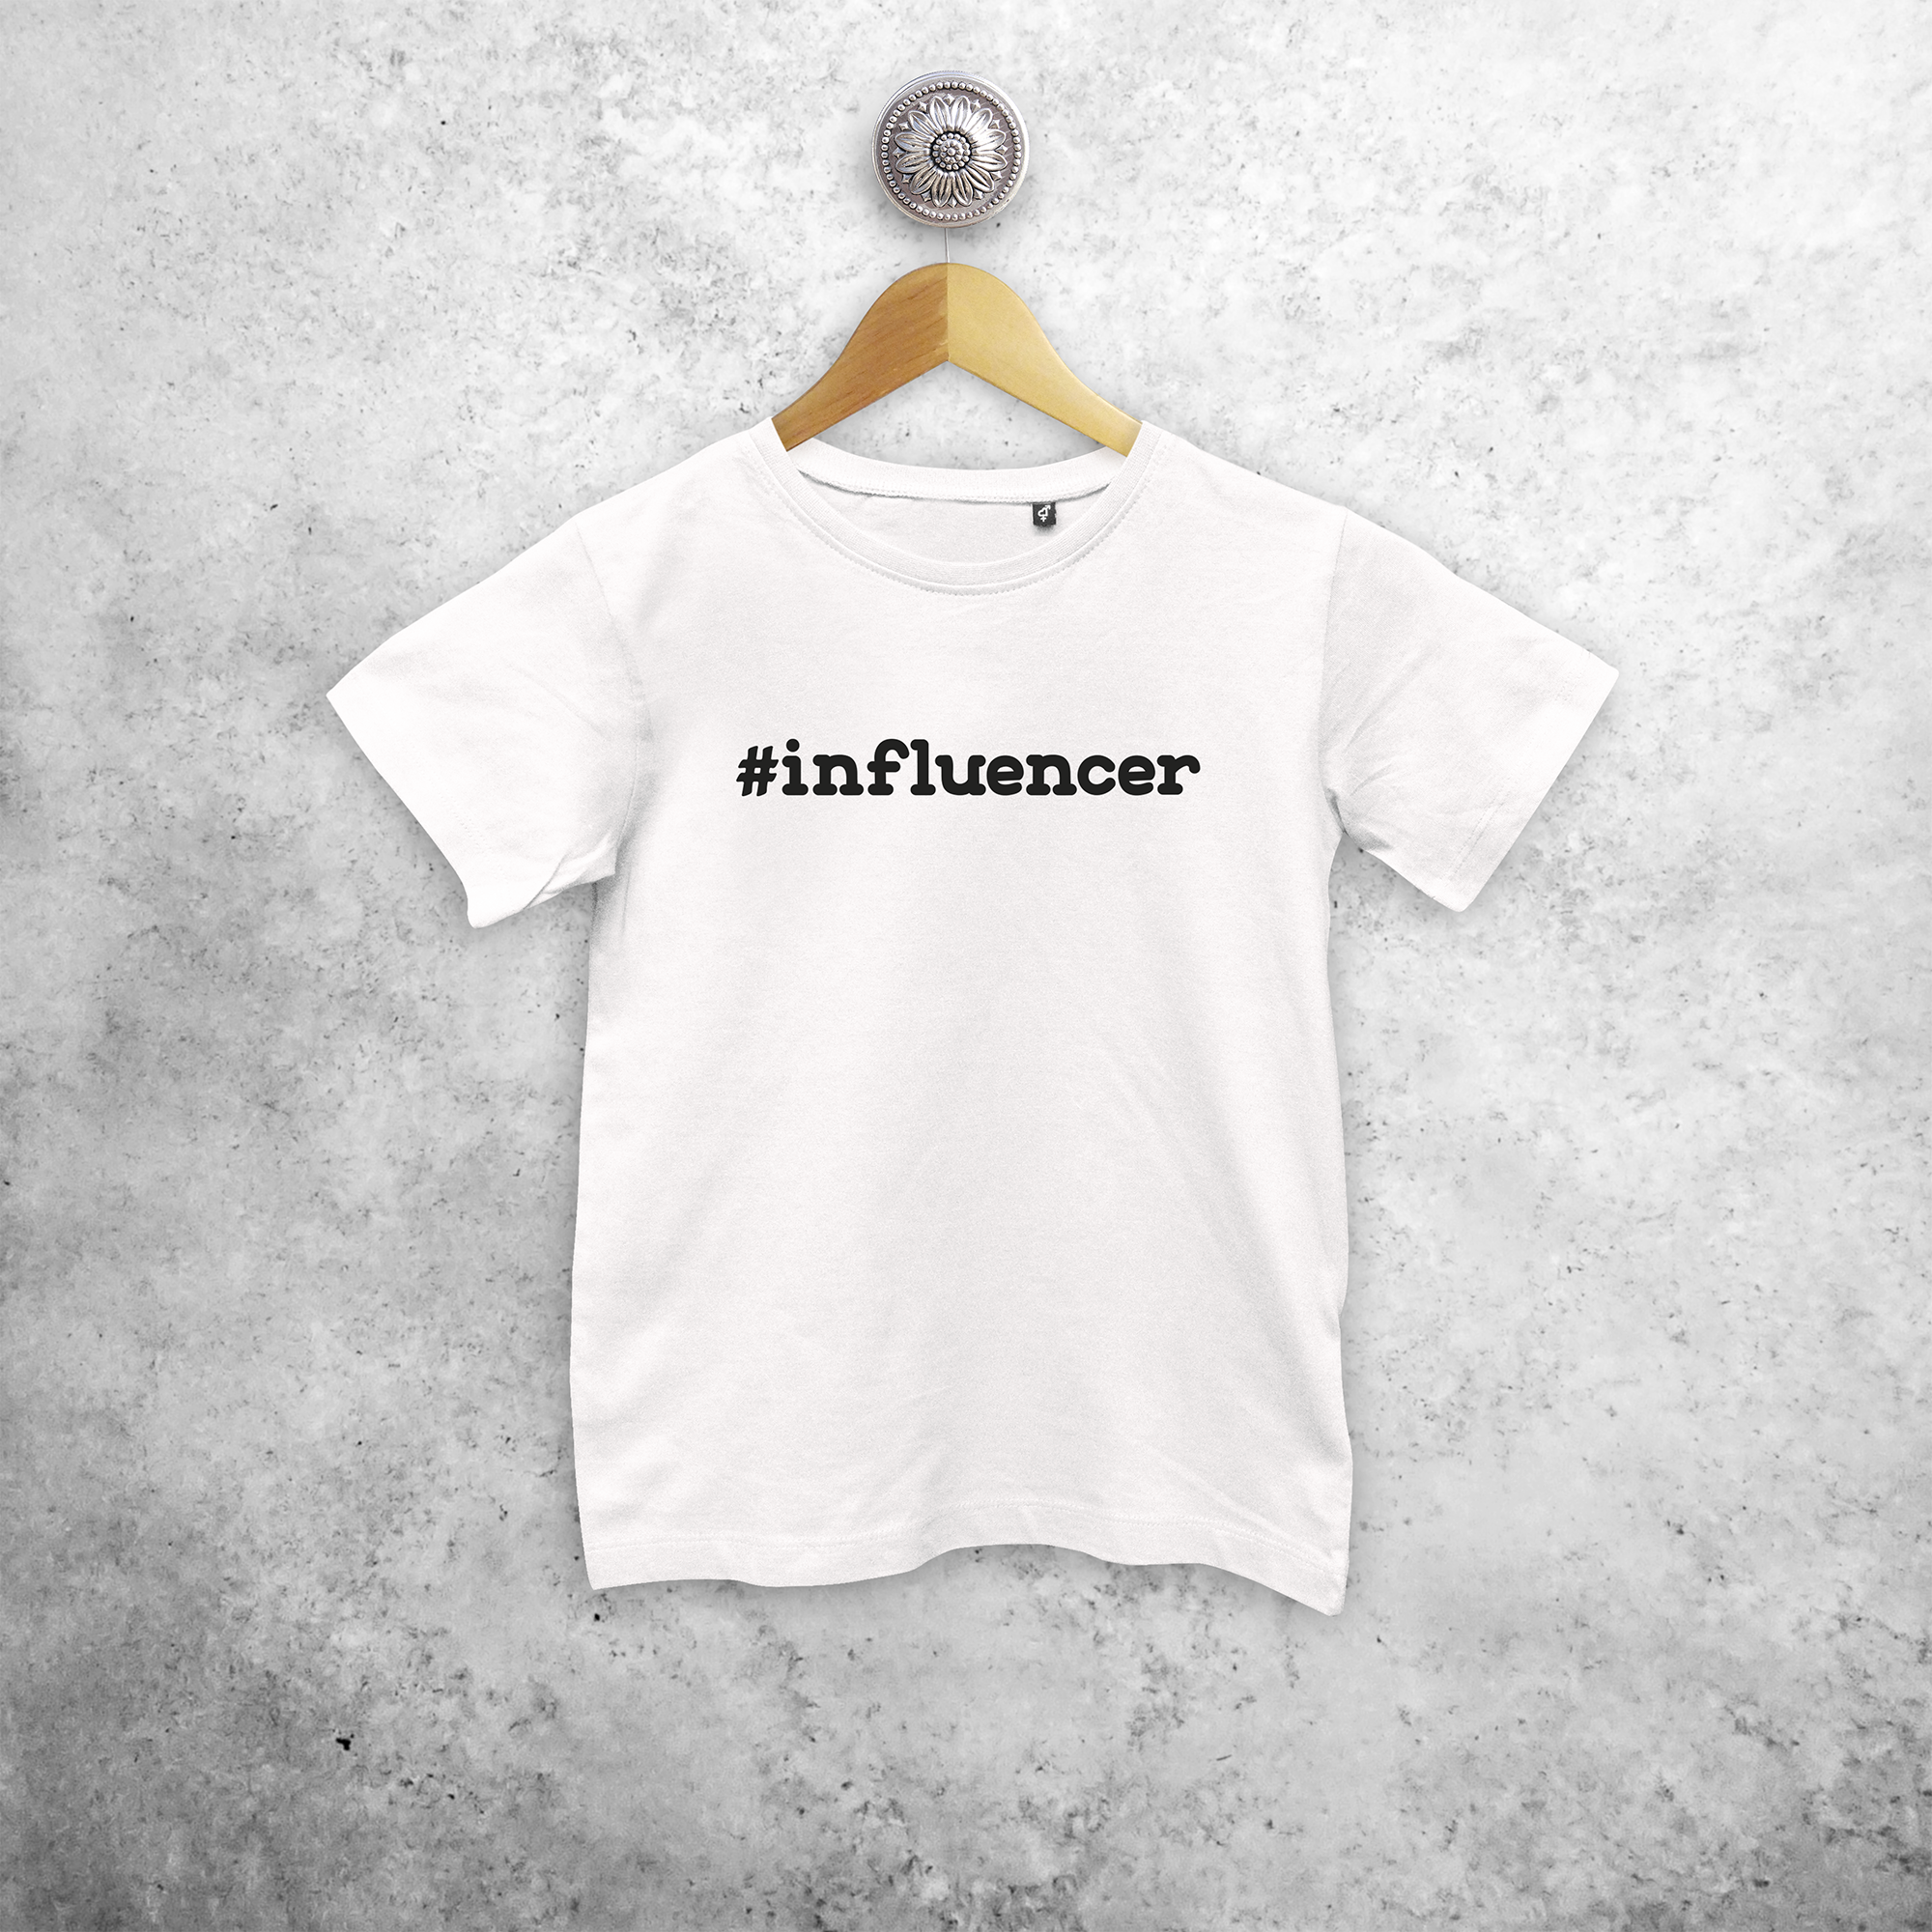 Kids shirt with short sleeves, with '#influencer' print by KMLeon.